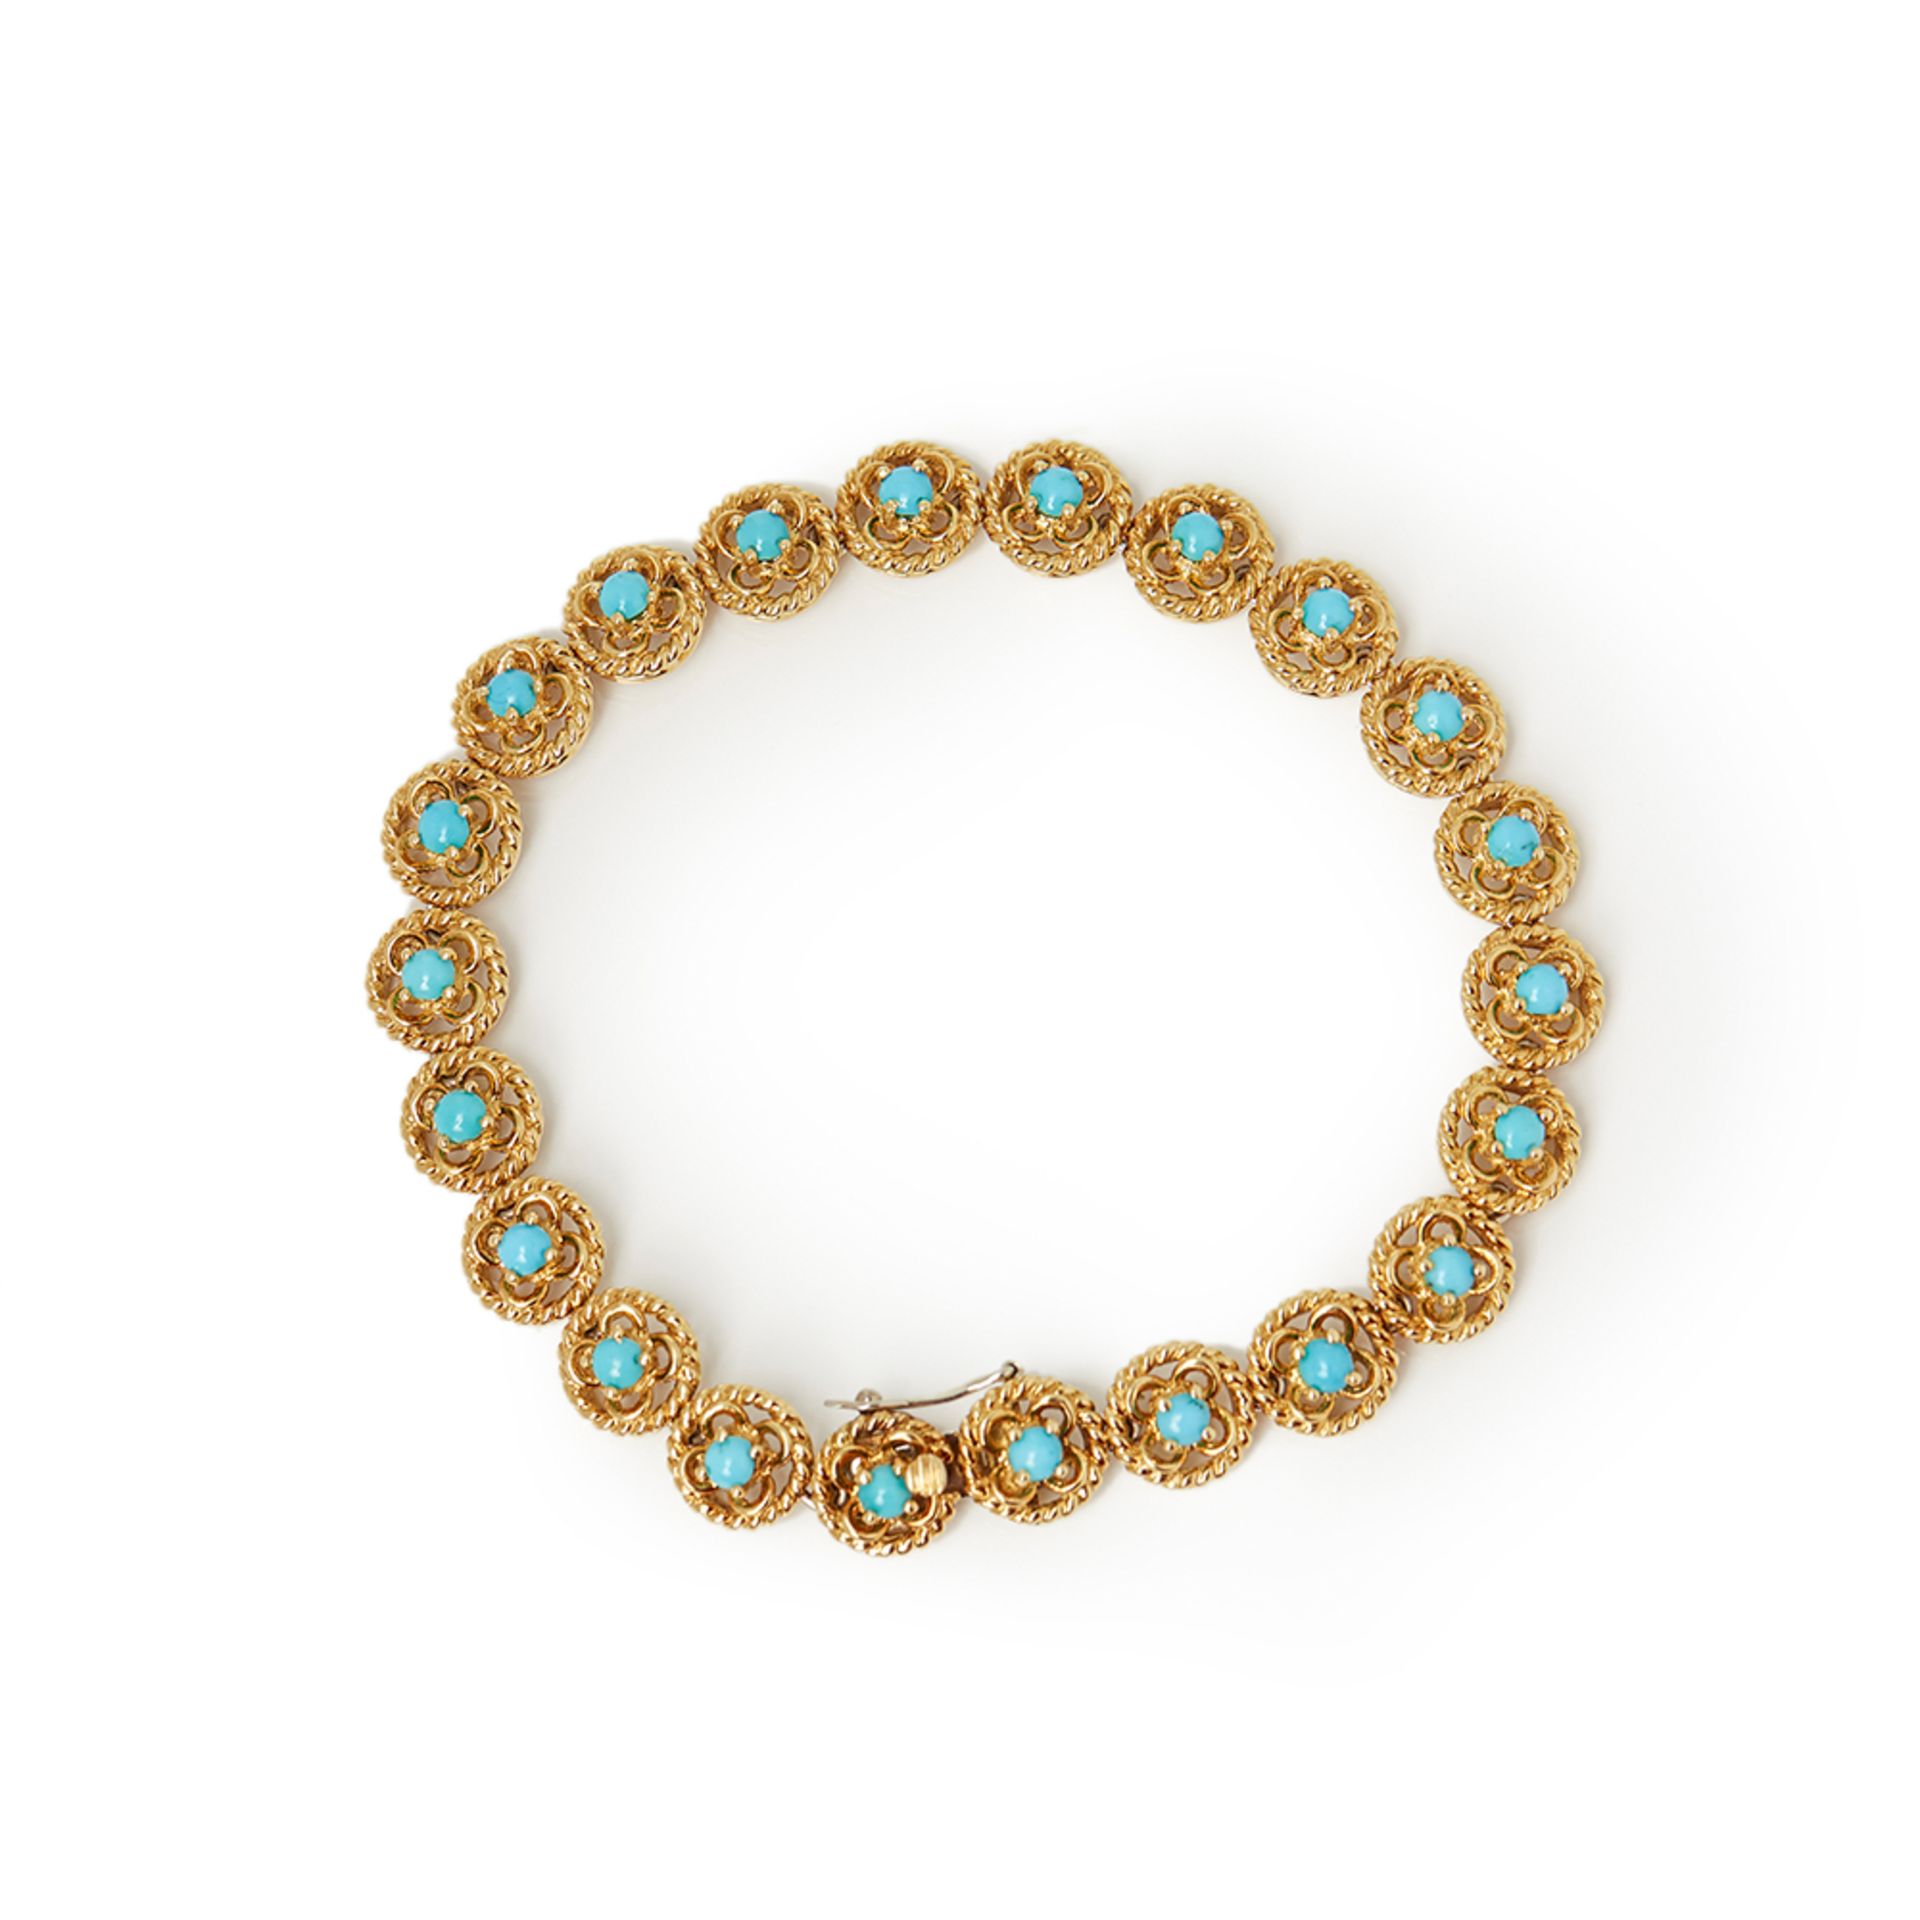 Cartier 18k Yellow Gold Turquoise Bracelet - Image 6 of 12